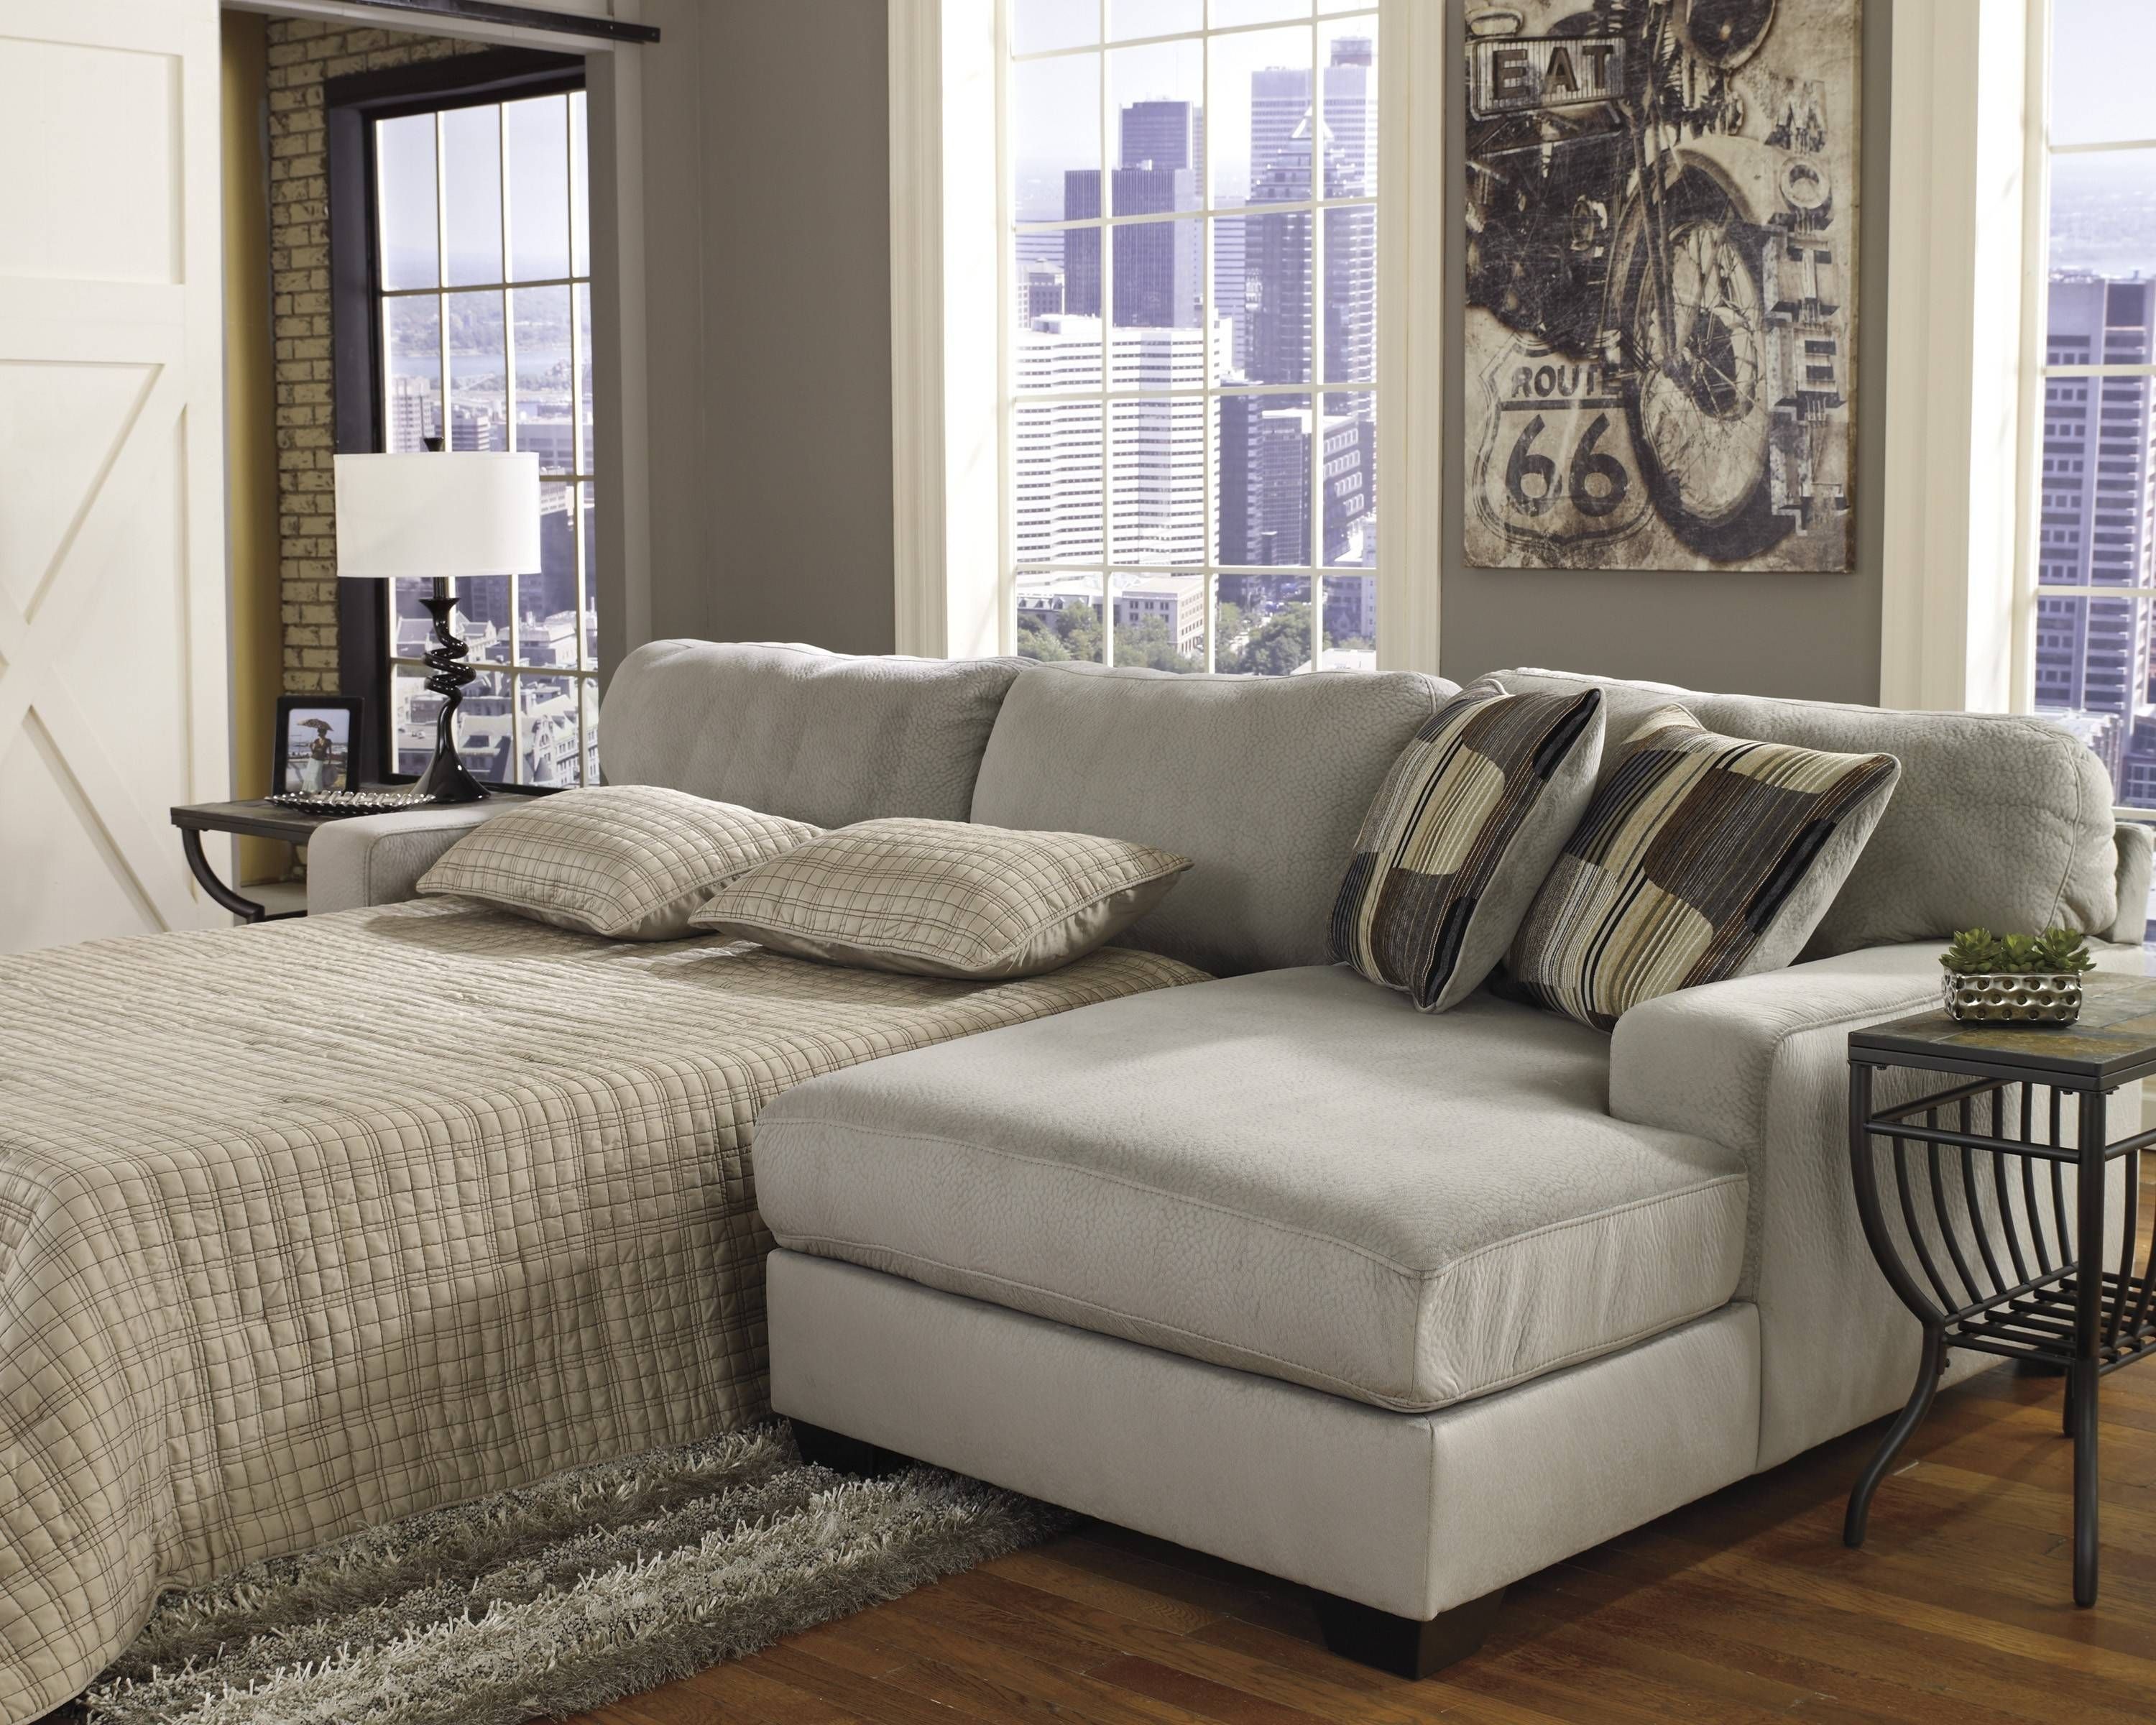 Sectional Sleeper Sofas Queen | Tehranmix Decoration With Regard To Sectional Sleeper Sofas With Chaise (View 2 of 30)